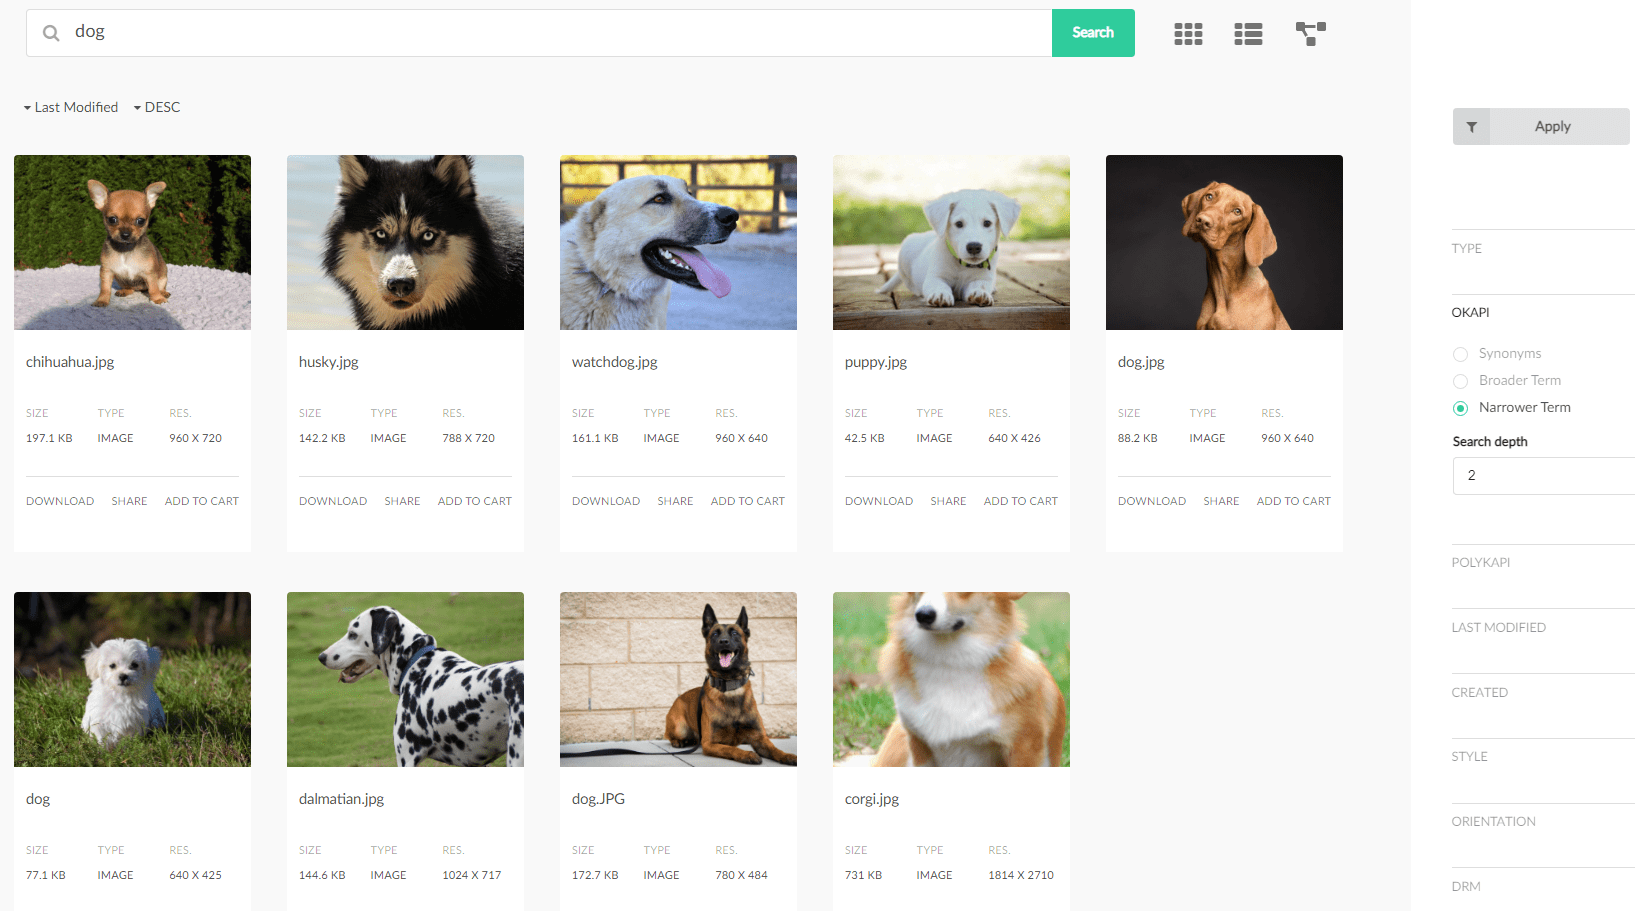 DAM search results with Okapi. Multiple pictures of dogs of various breeds shown in response to the simple full-text query, 'dog'. Only some of the images contain the queried word in the filename.